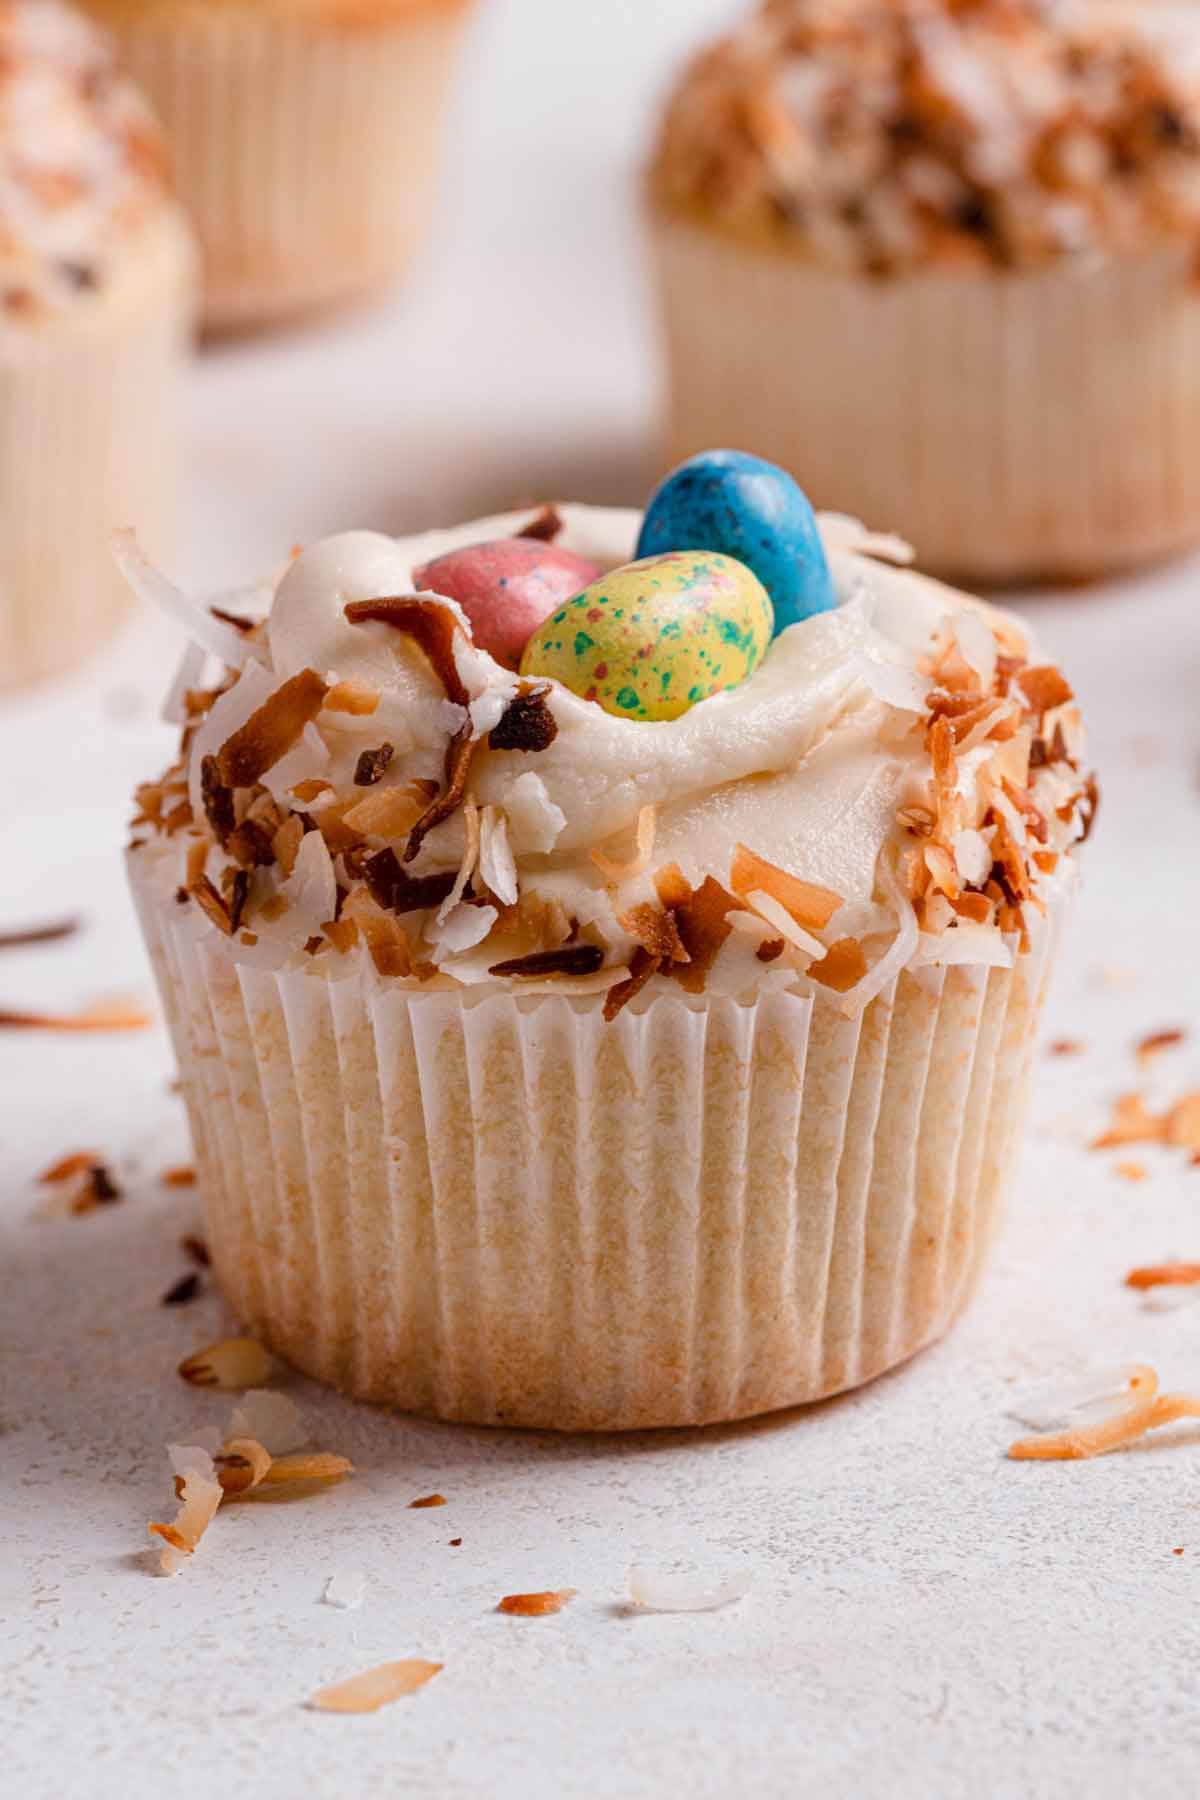 A single coconut cupcake in a paper wrapper, topped with frosting, rolled in toasted coconut flakes and topped with Whopper eggs.